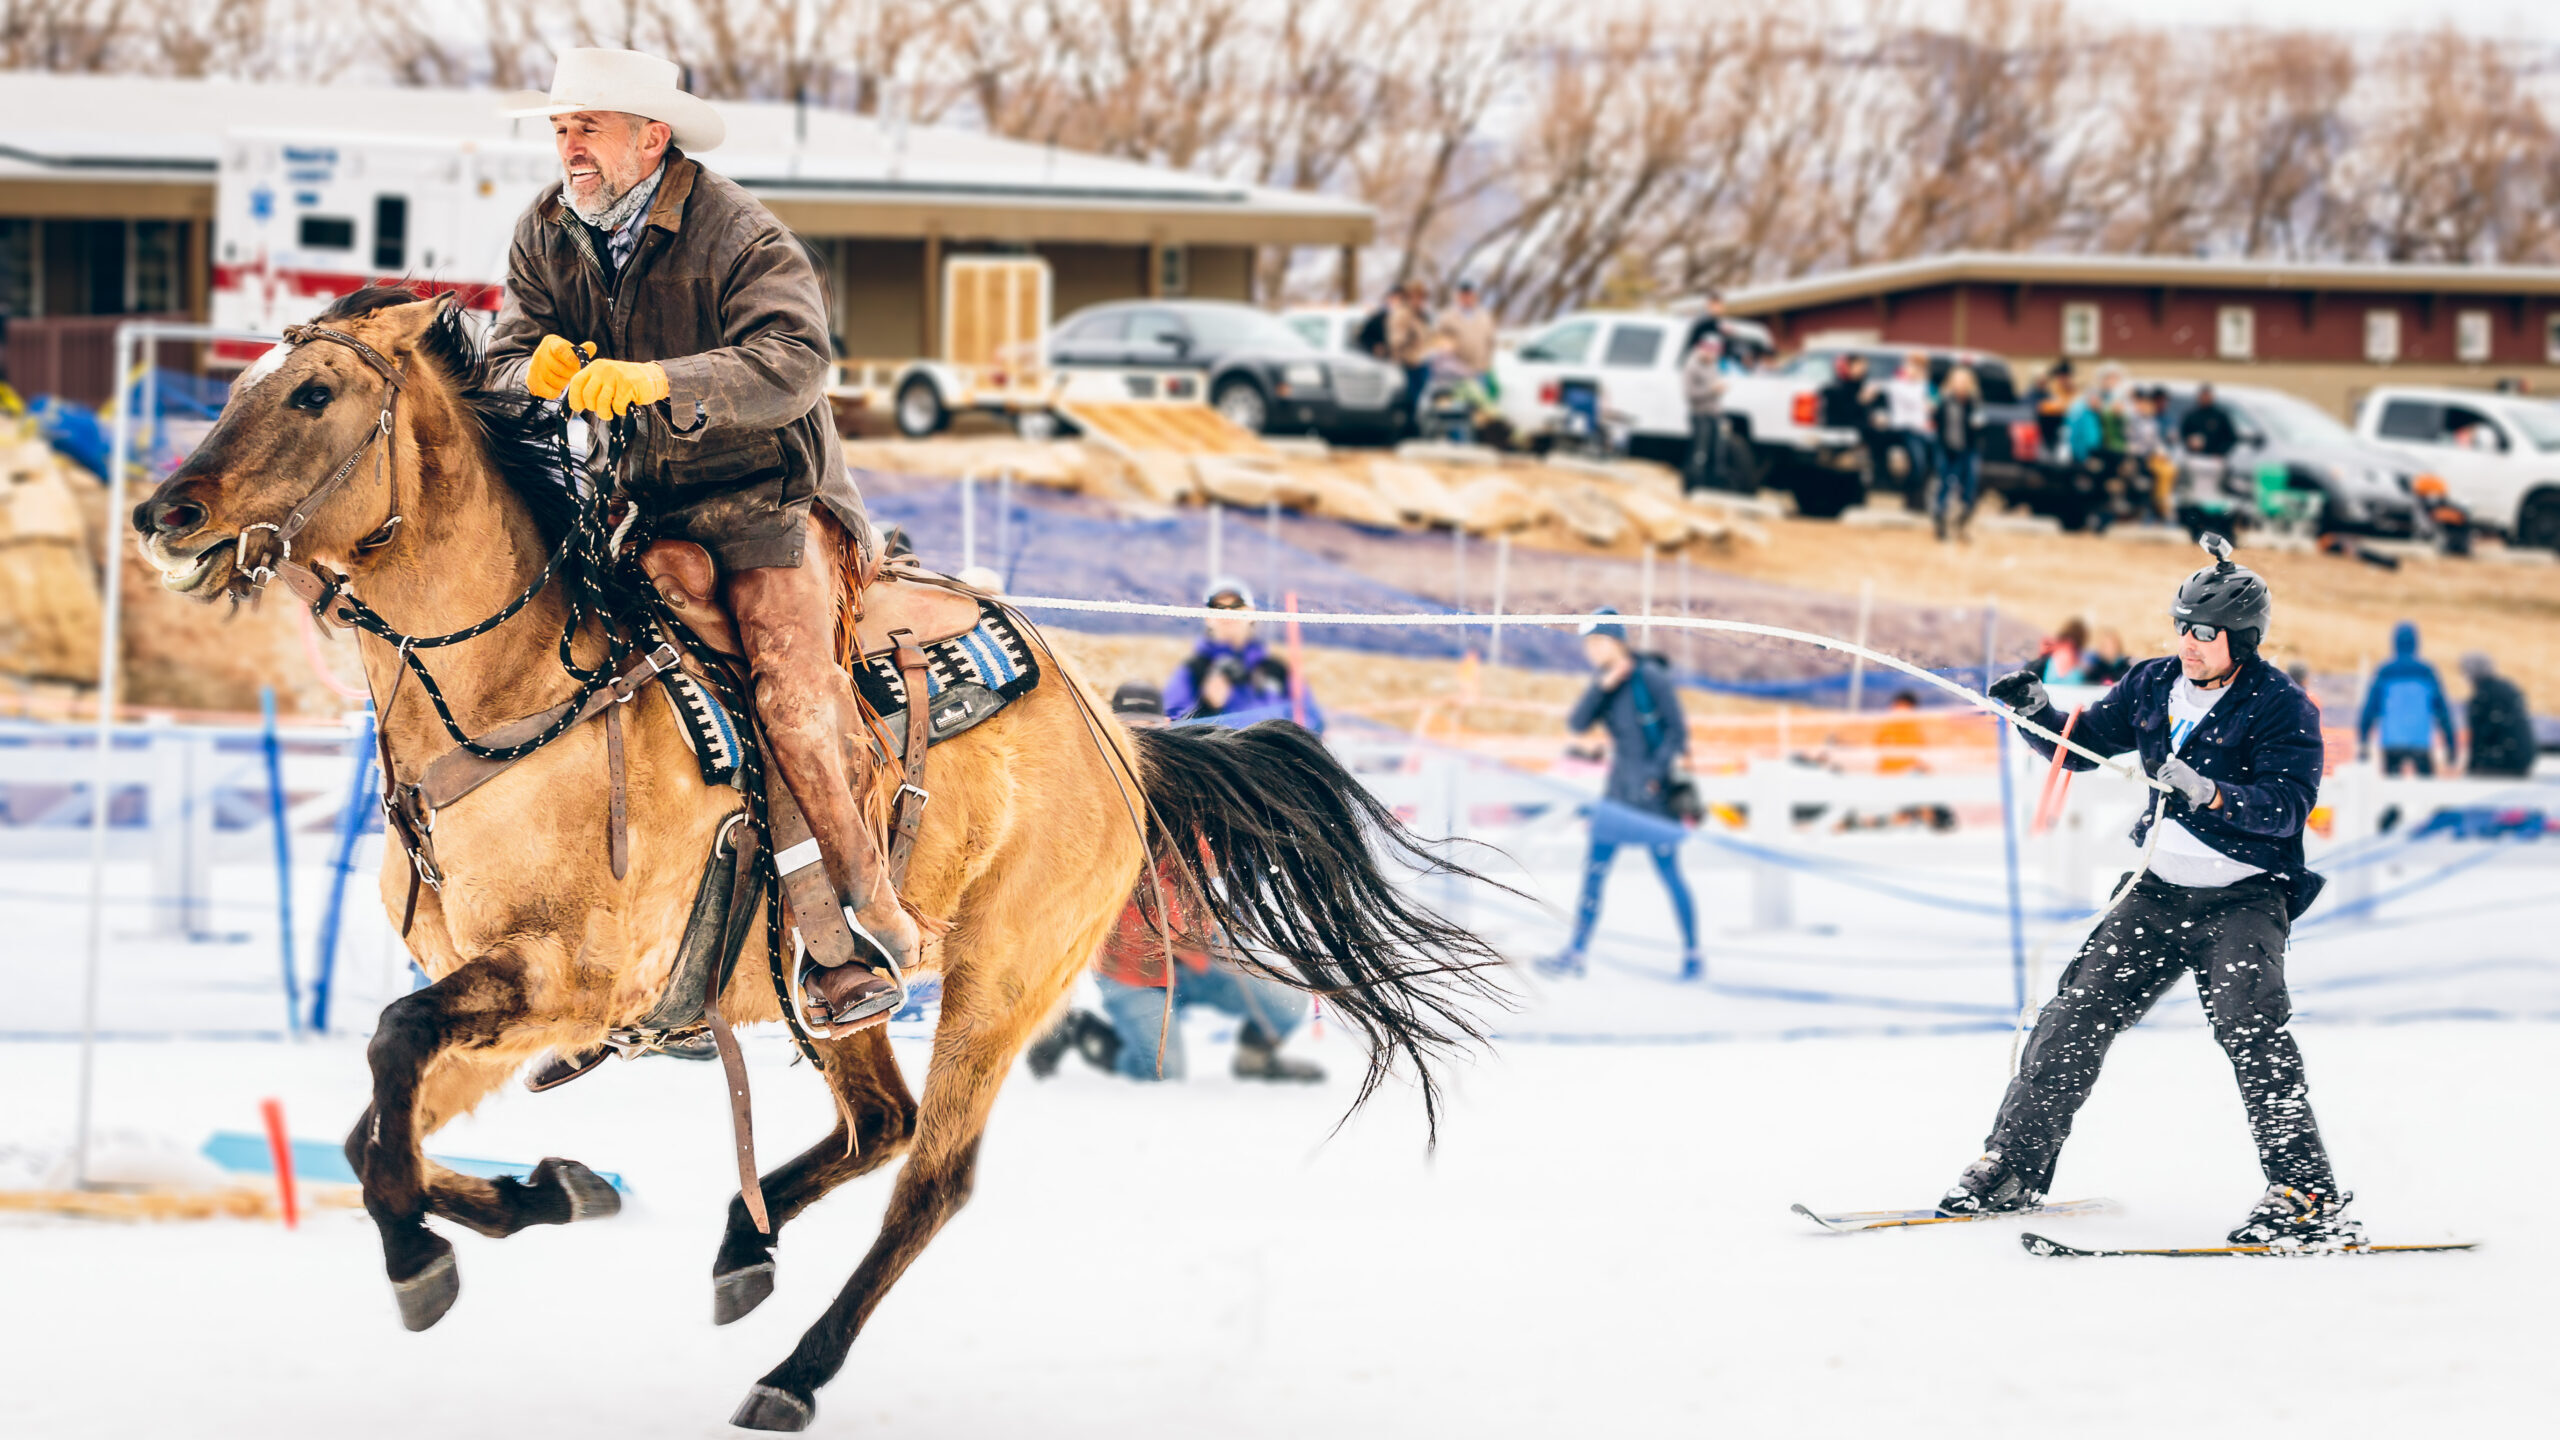 A person rides a brown horse while a skier is pulled behind....